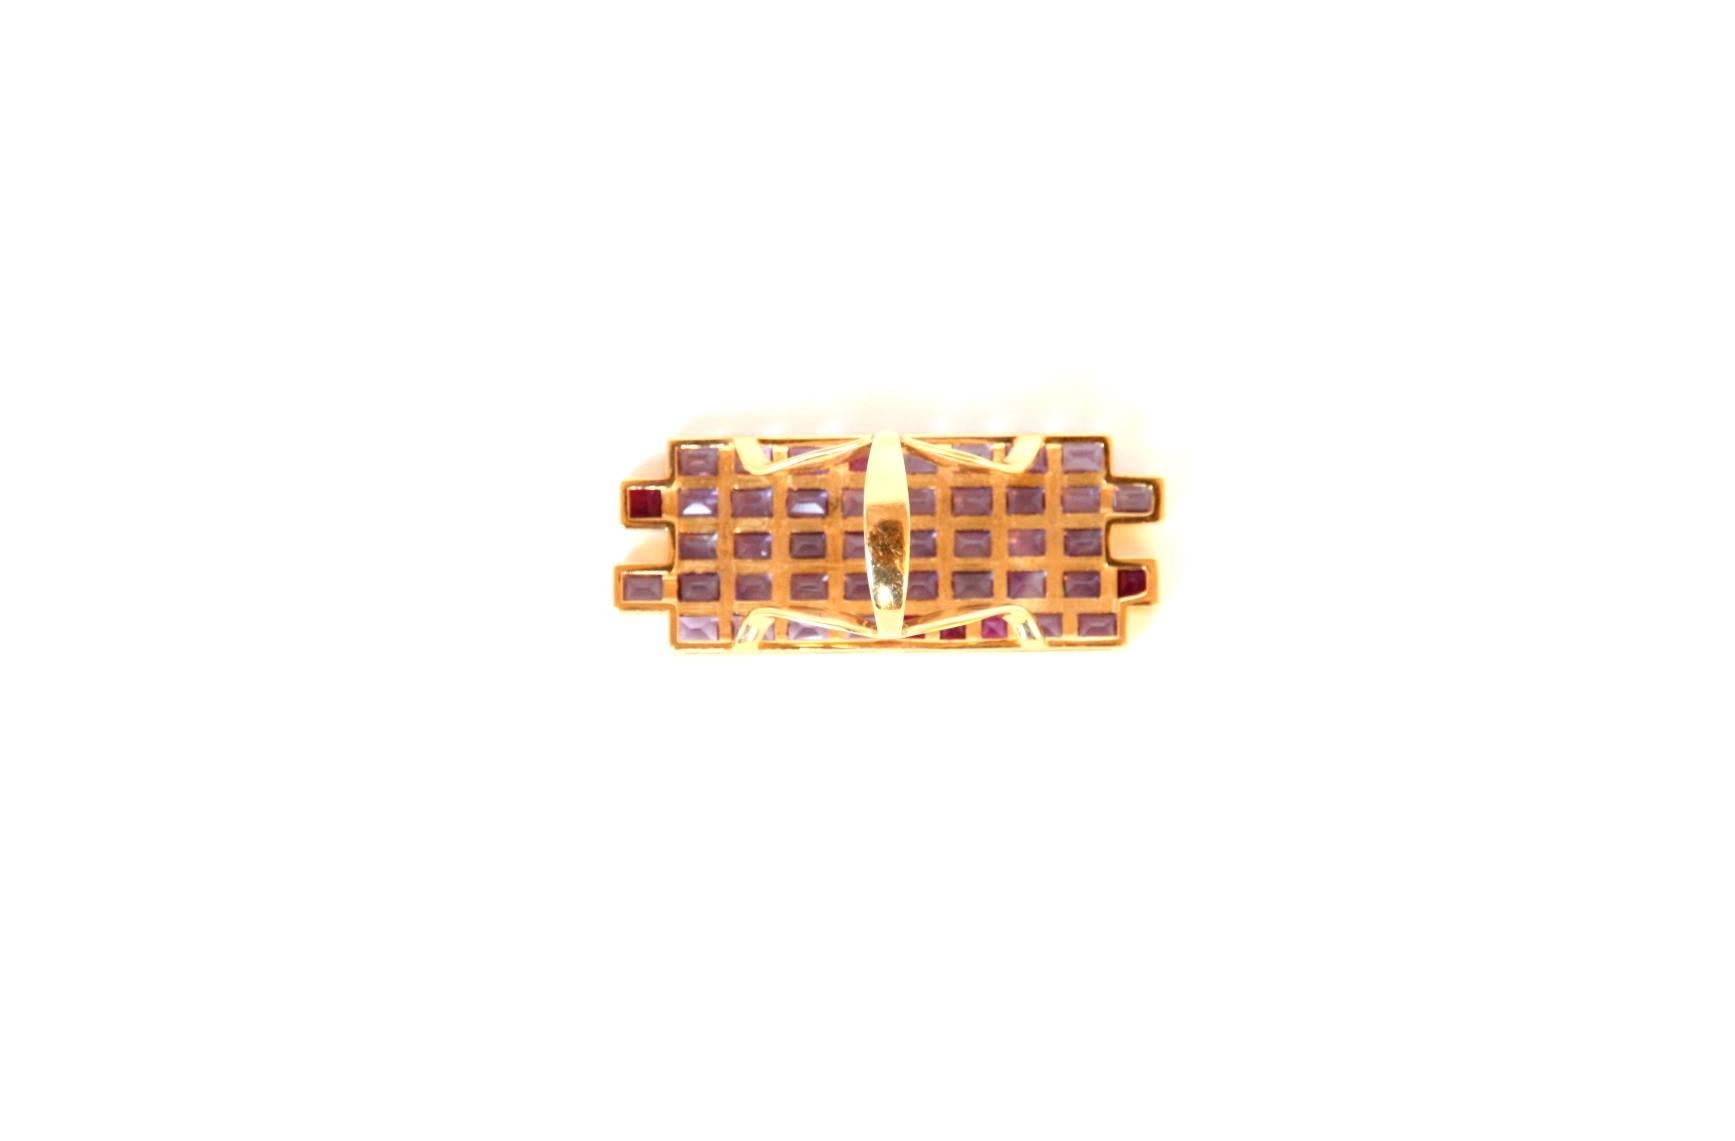 Unique Ring inspired to a cathedral window with ruby and Amethyst princess cut stone, gold 18k gr.15,90, size 14eu.
All Giulia Colussi jewelry is new and has never been previously owned or worn. Each item will arrive at your door beautifully gift